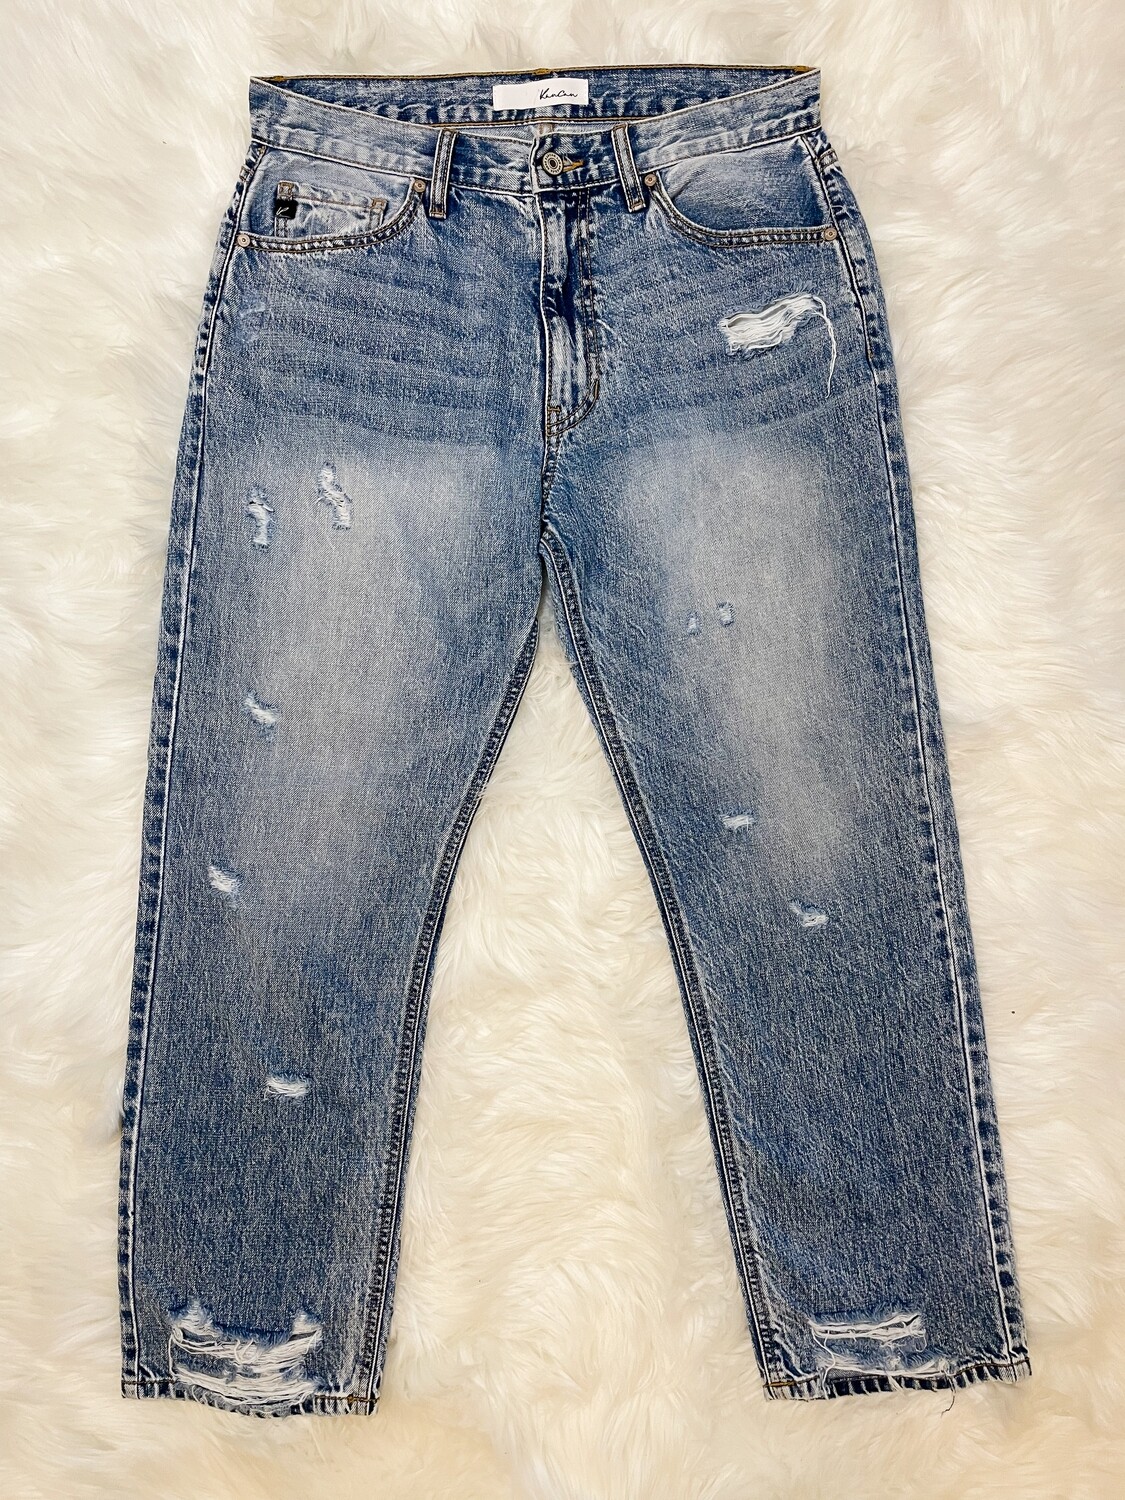 KanCan Distressed Girlfriend Jeans - Size 28